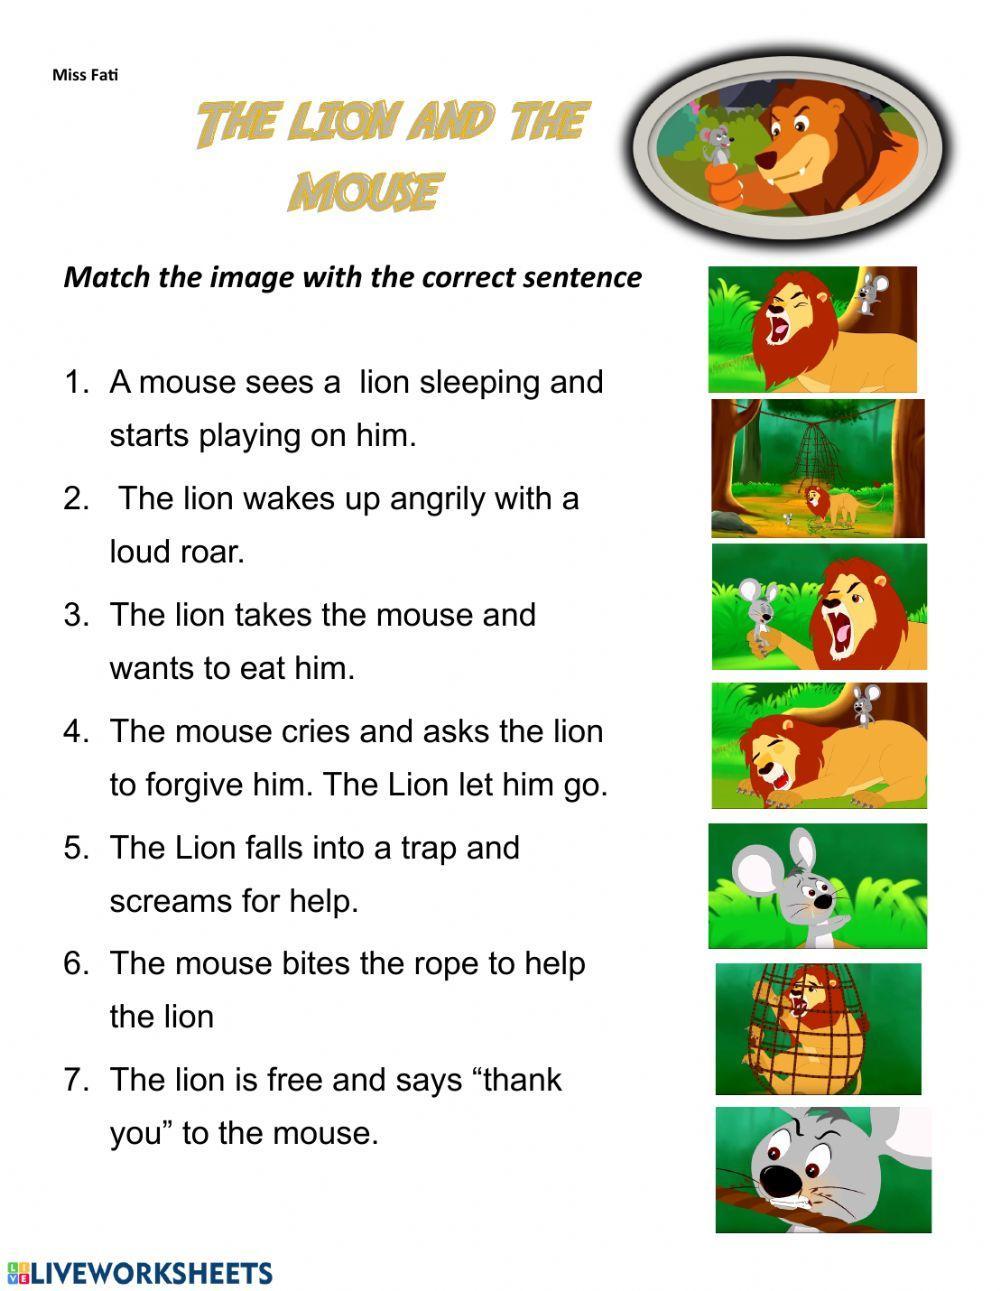 The lion and the mouse worksheet | Live Worksheets